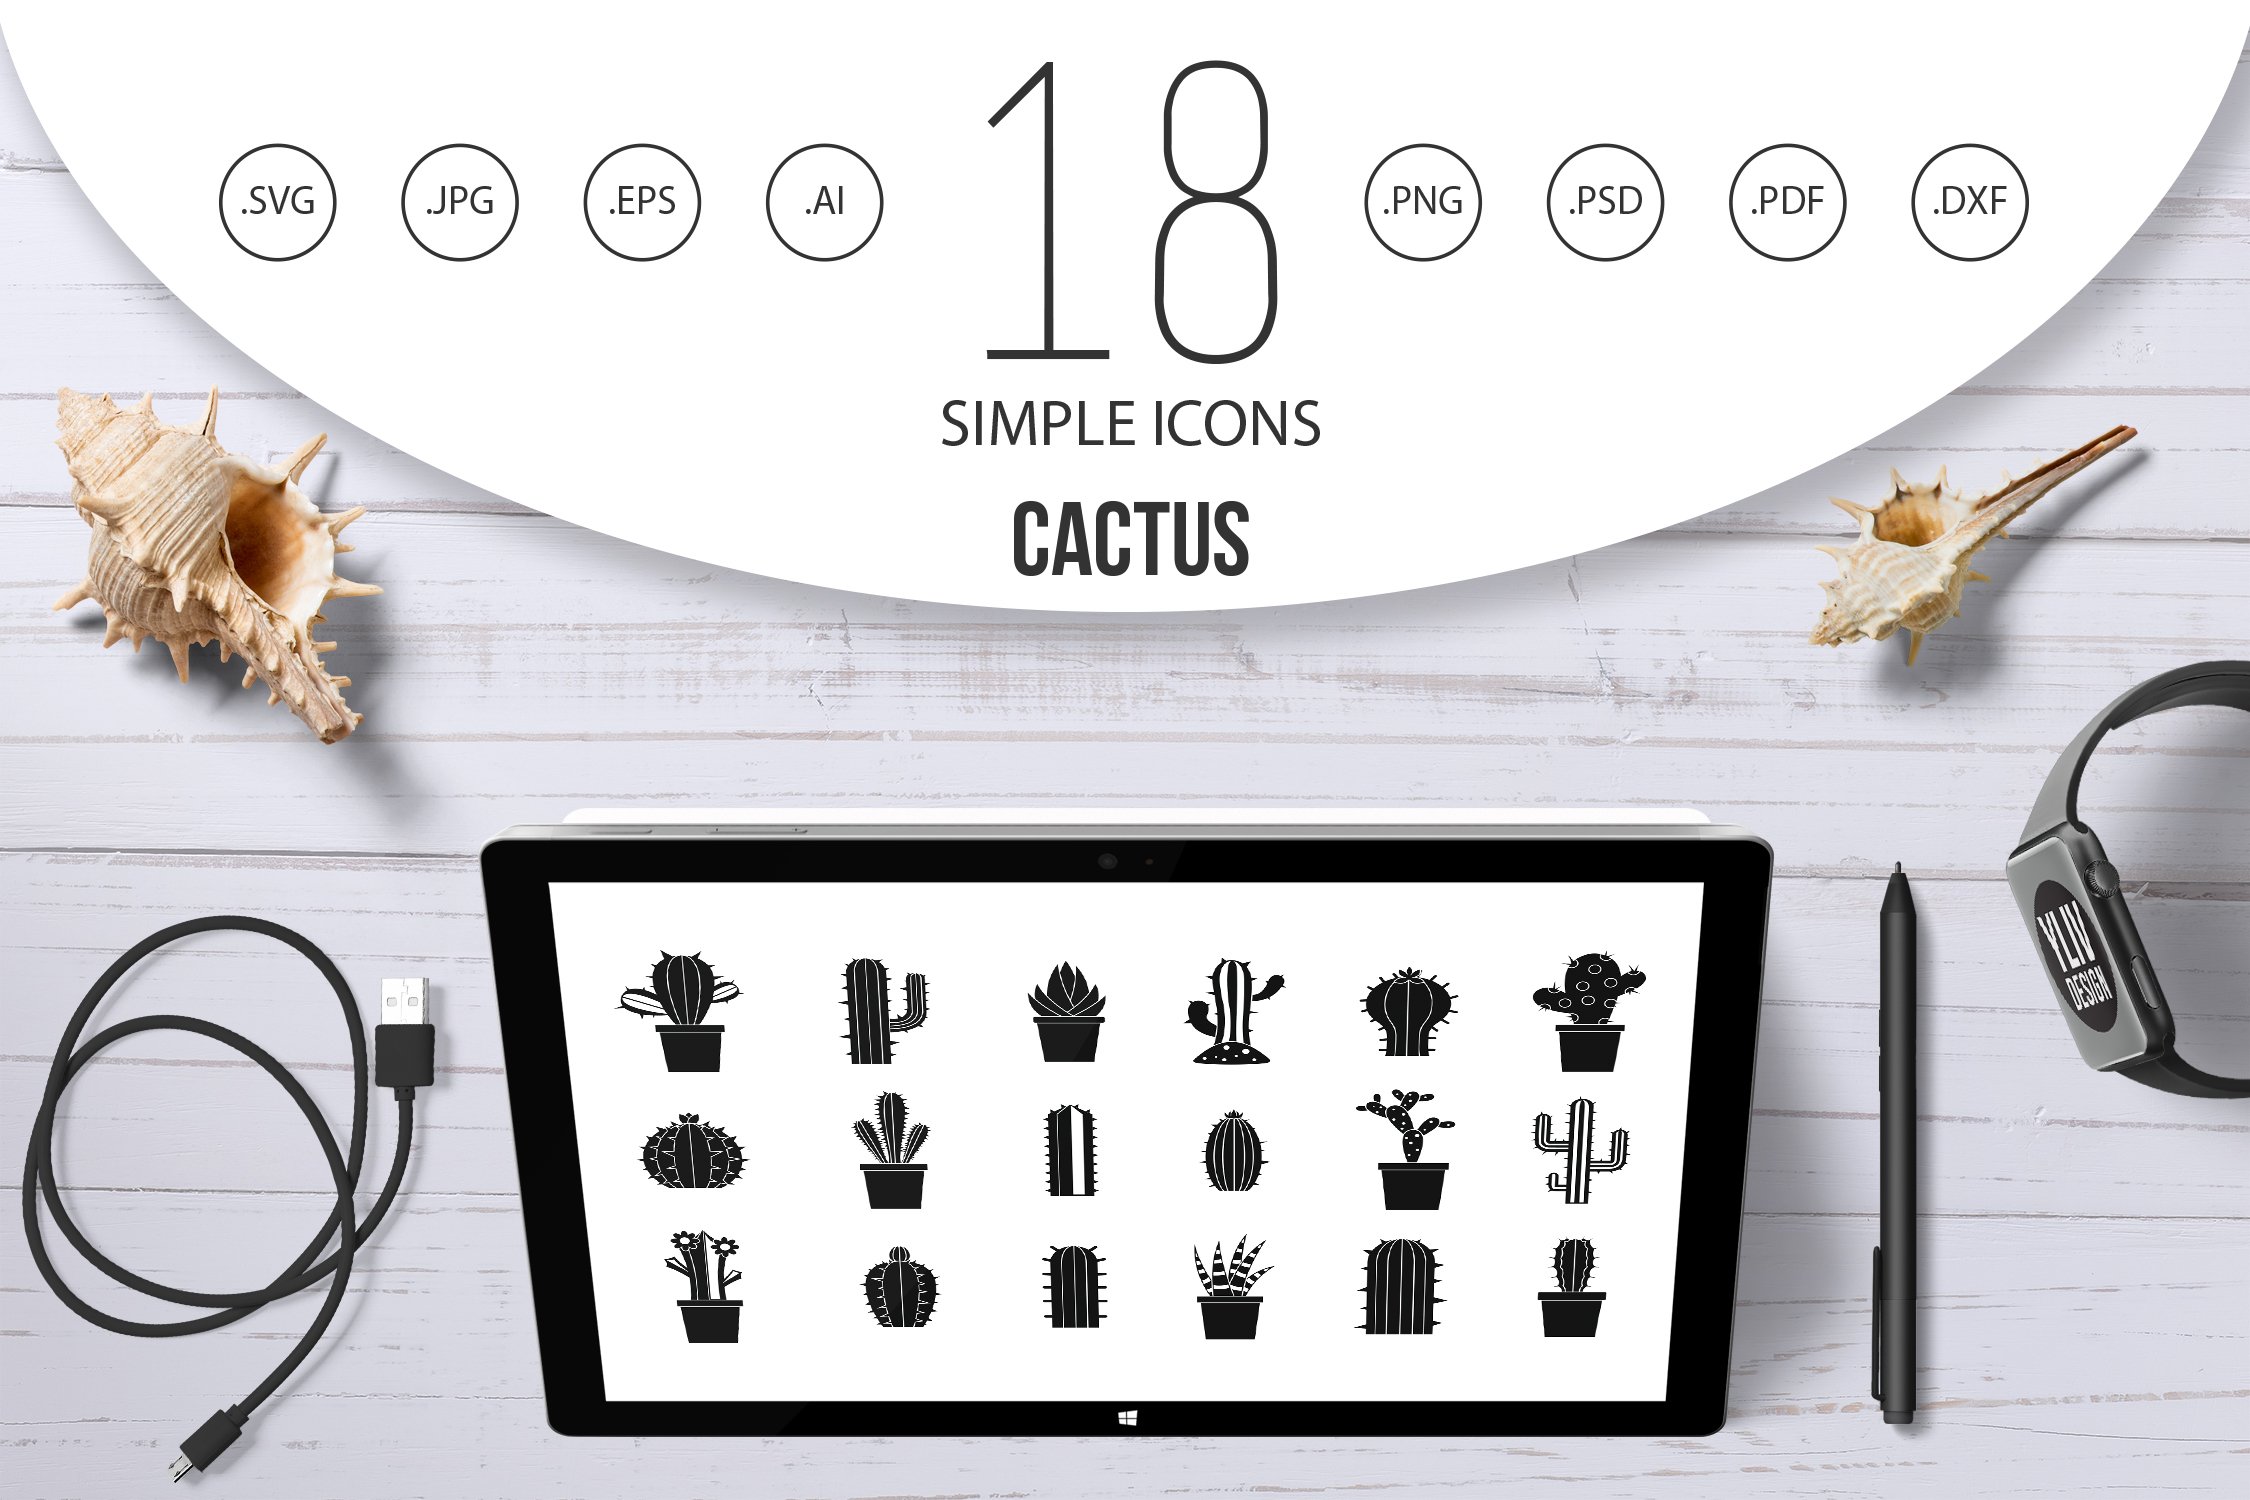 Cactus icon set, simple style cover image.